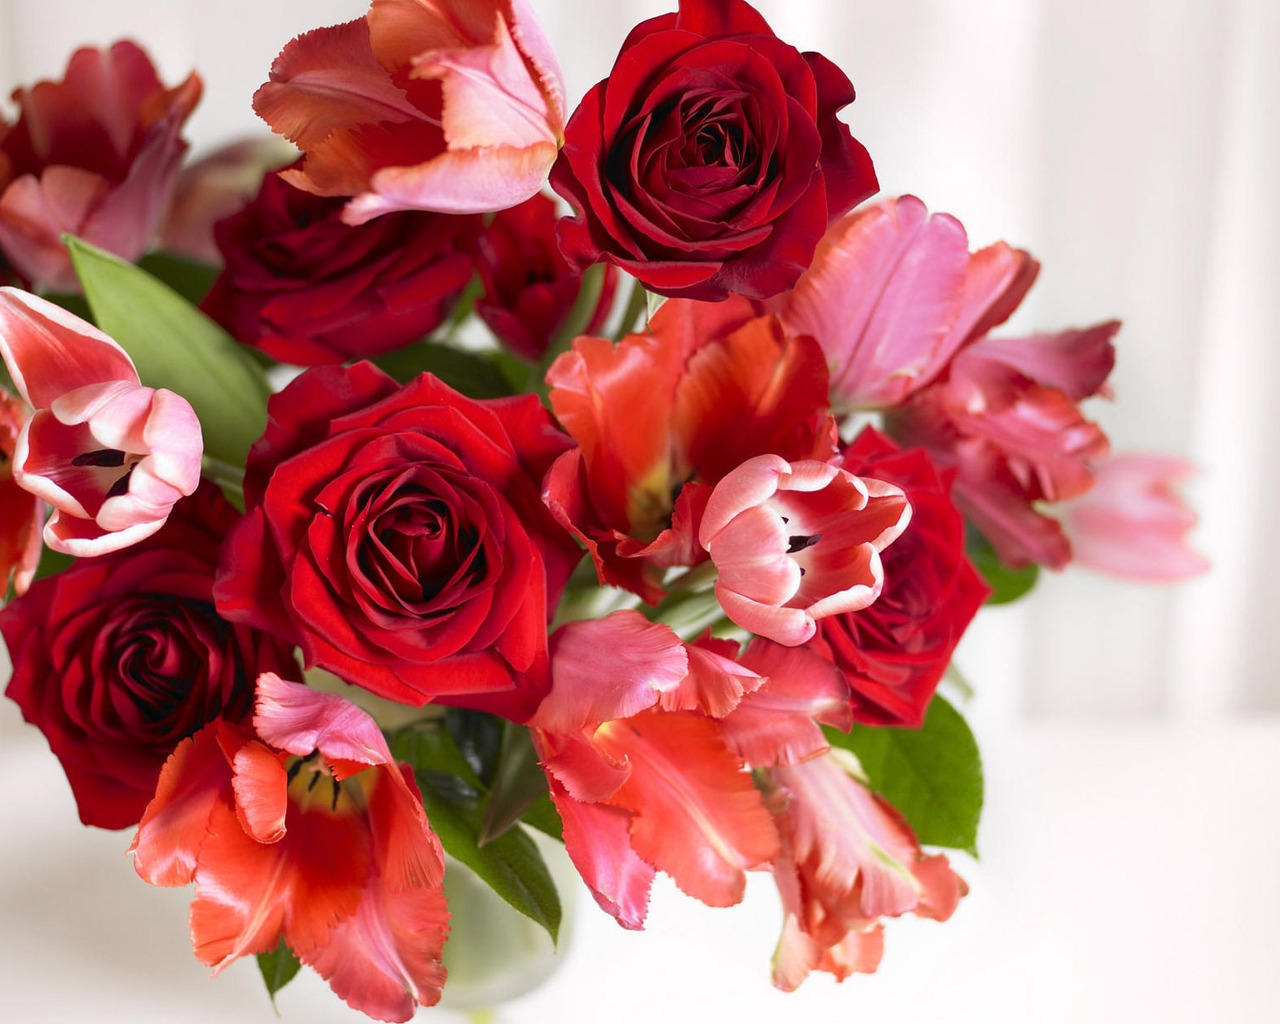 Arrangement of Roses and Tulips for 1280 x 1024 resolution